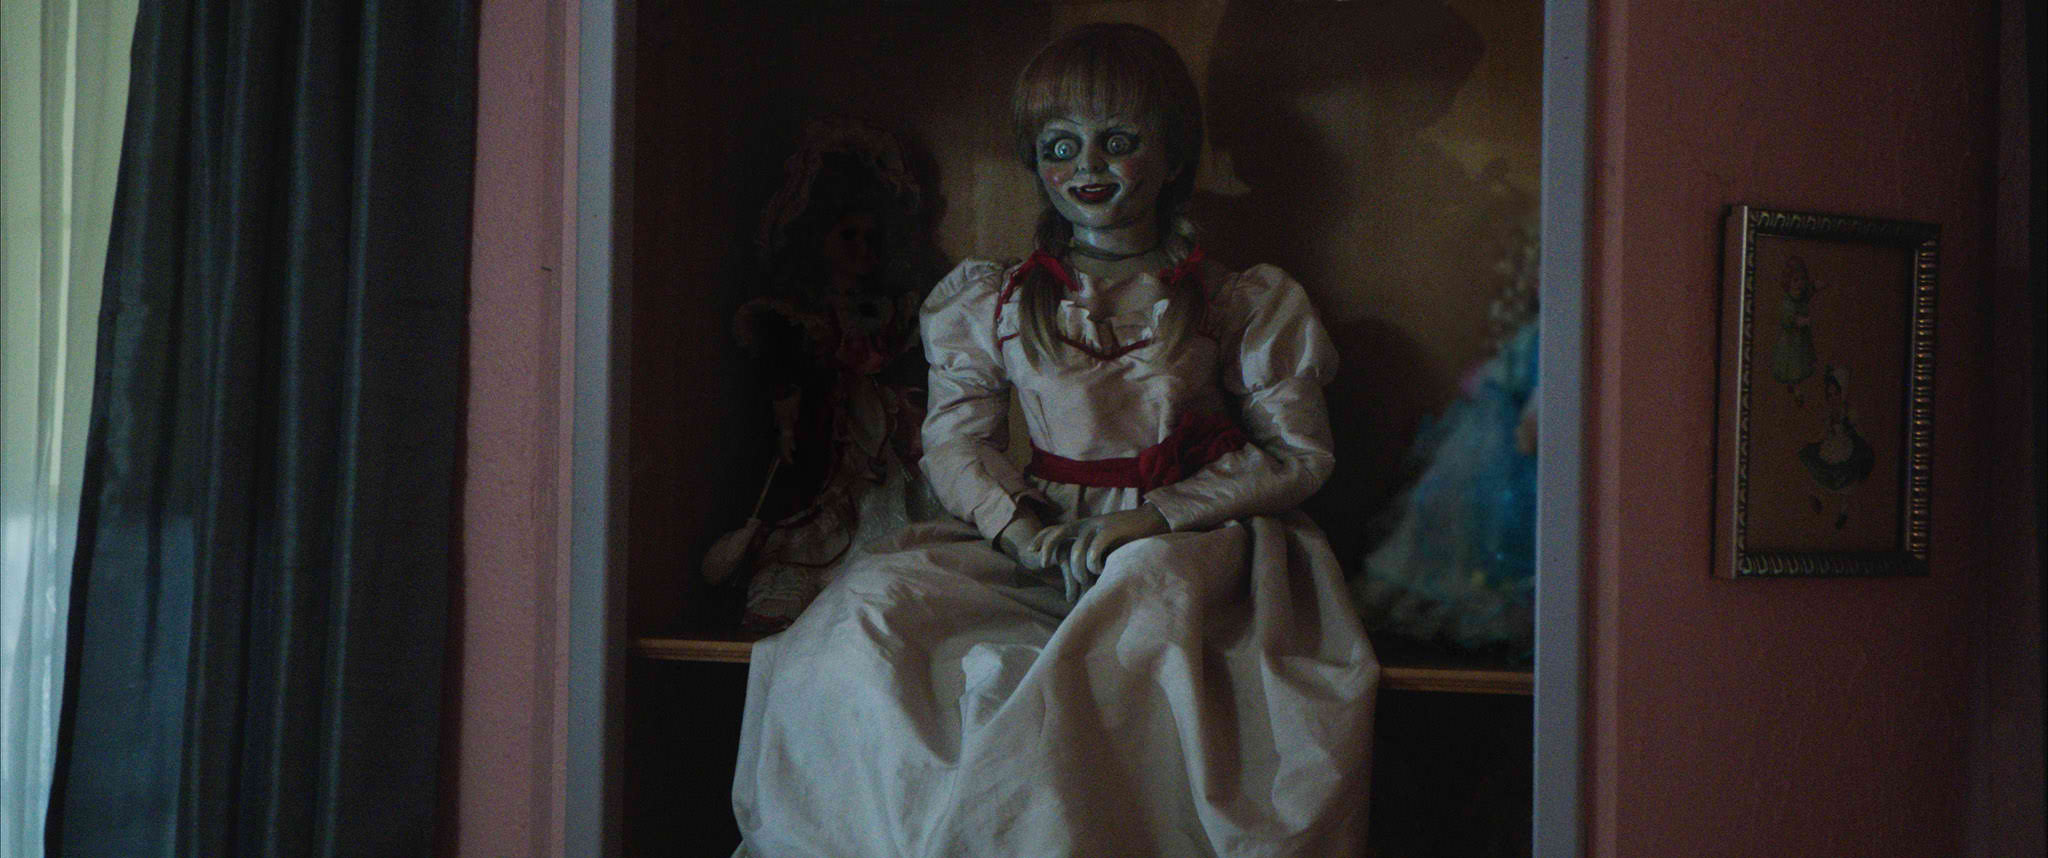 Take your first look at “ANNABELLE 2” in announcement trailer